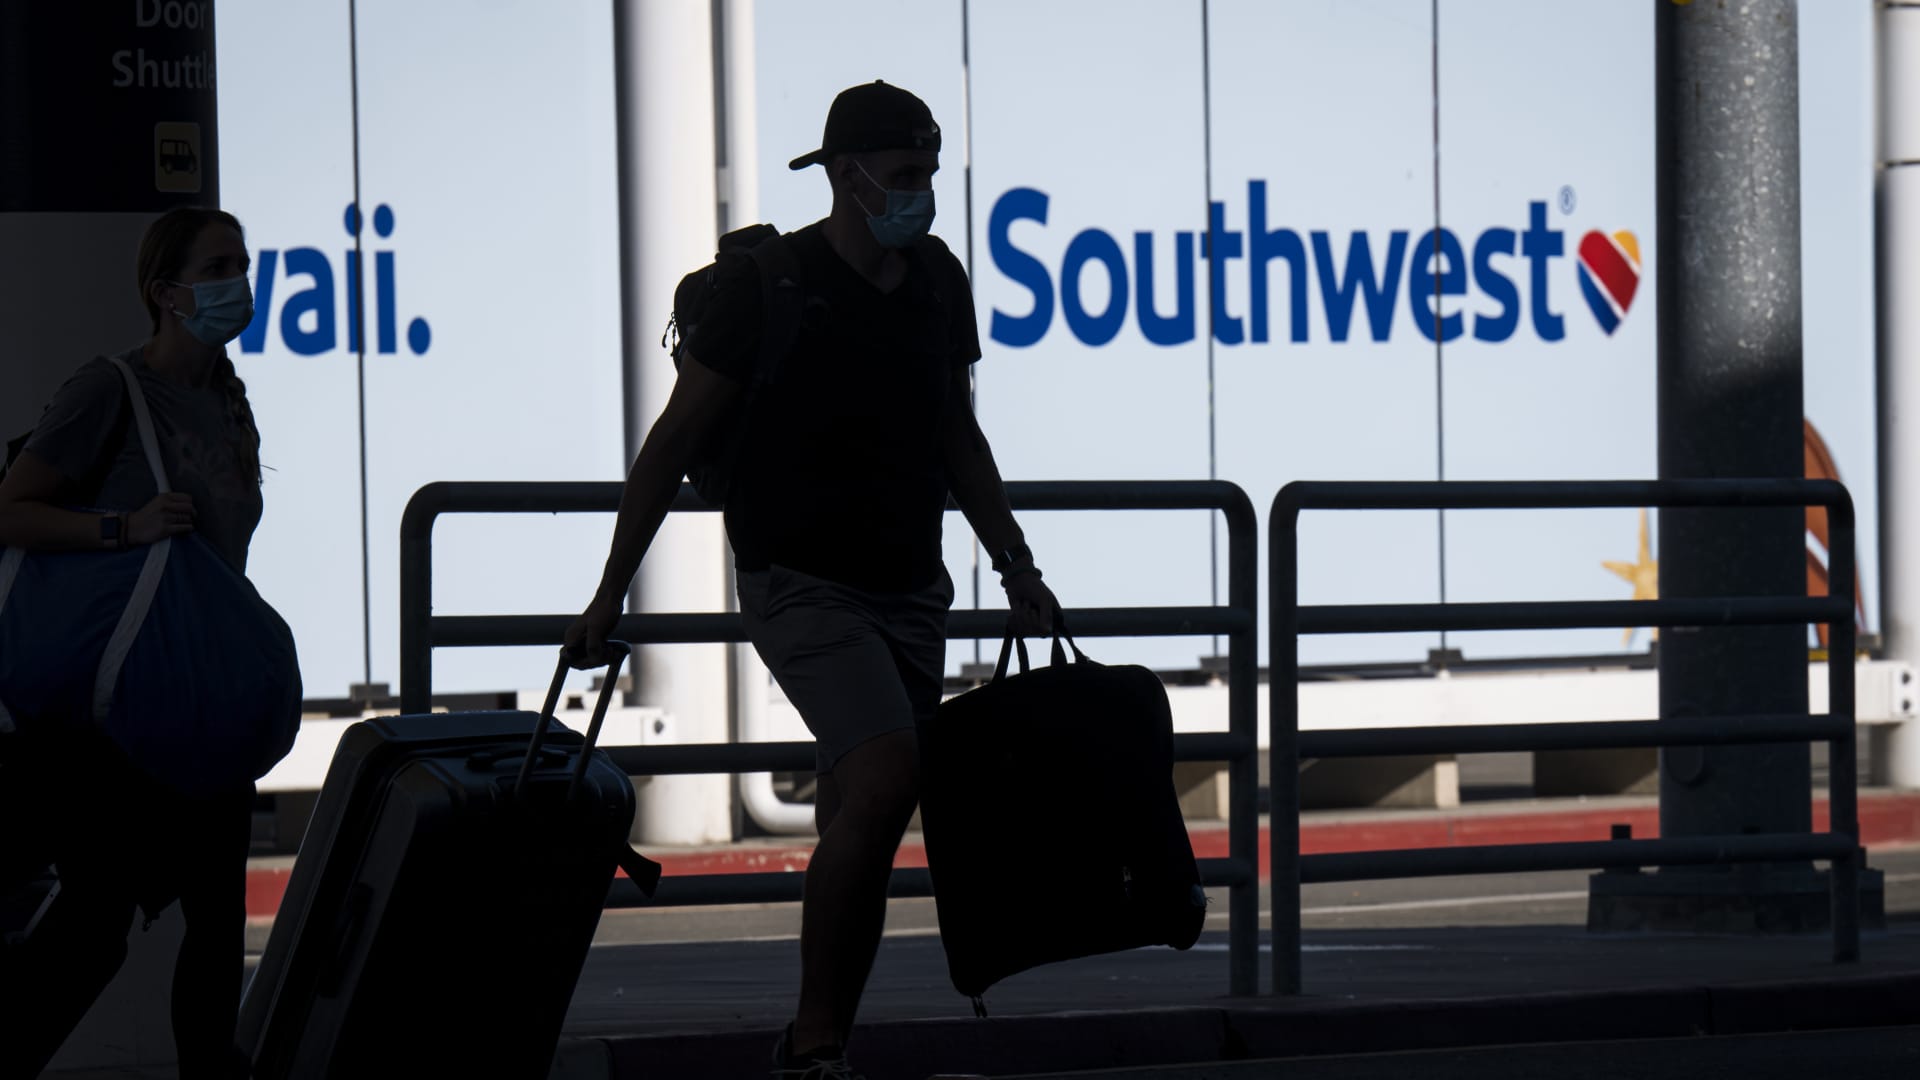 Travelers wearing protective masks cross a street outside a Southwest Airlines Co. check-in area at Oakland International Airport in Oakland, California, U.S., on Monday, Oct. 19, 2020.